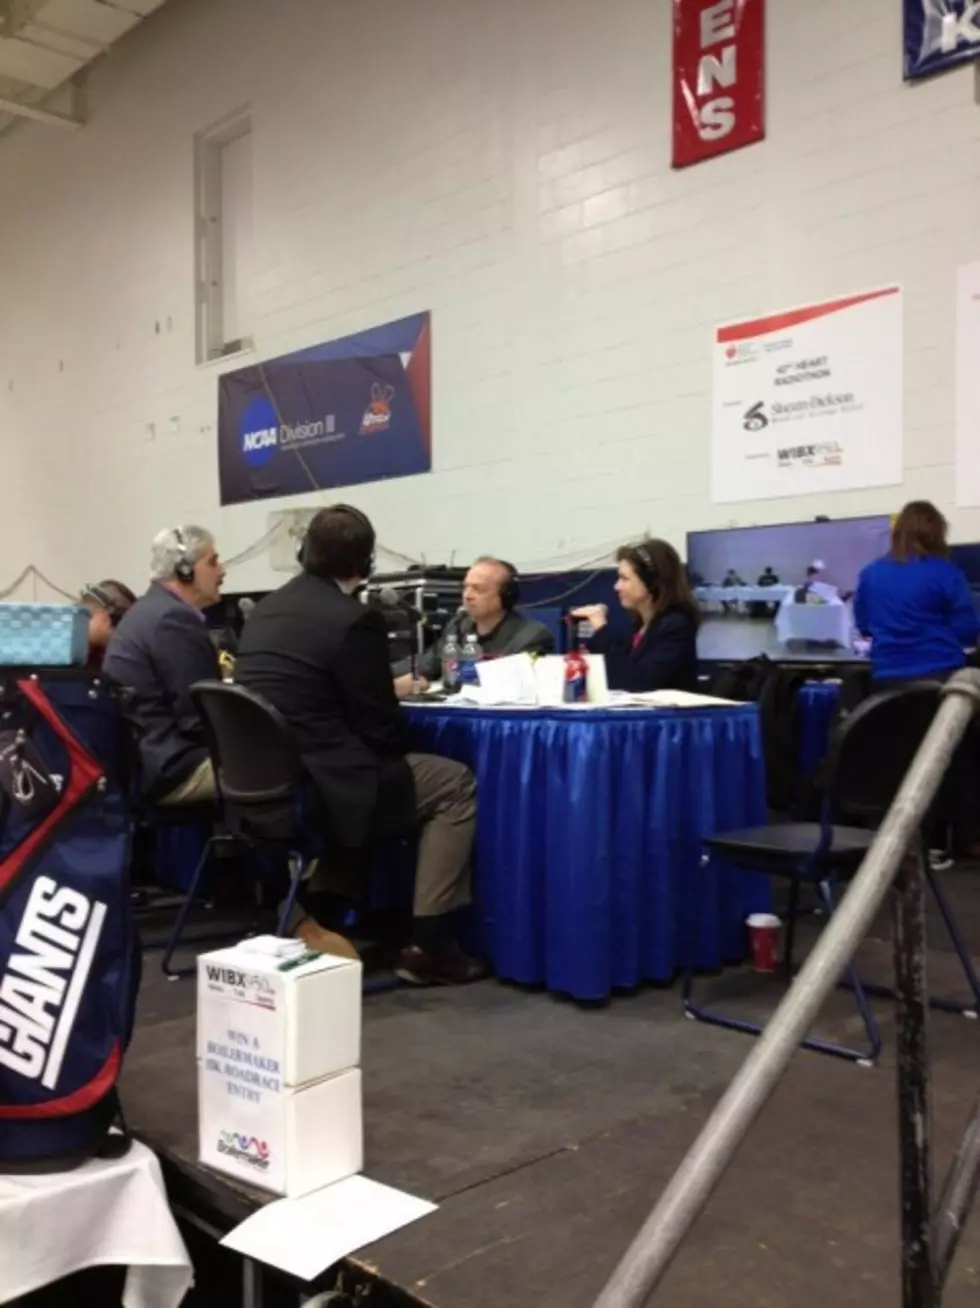 Live at Utica College for Heart Expo and Radiothon 2013 [PHOTOS]